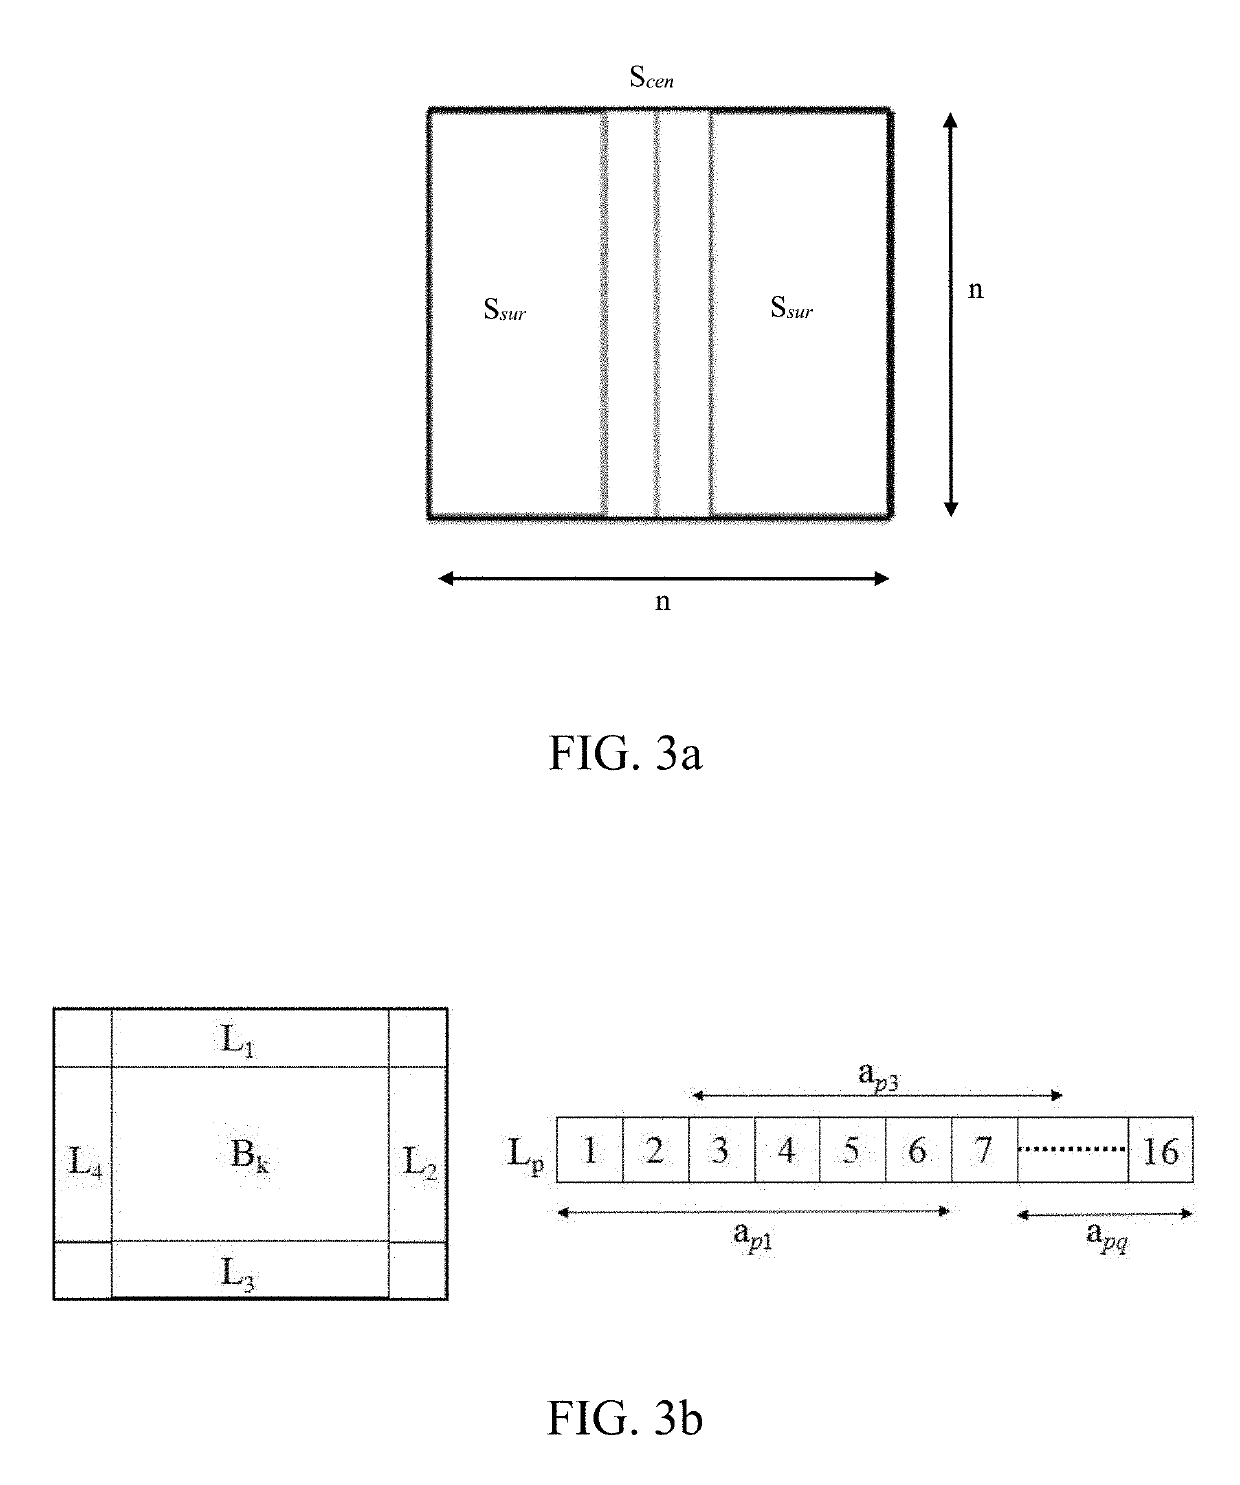 Automated system and method of retaining images based on a user's feedback on image quality